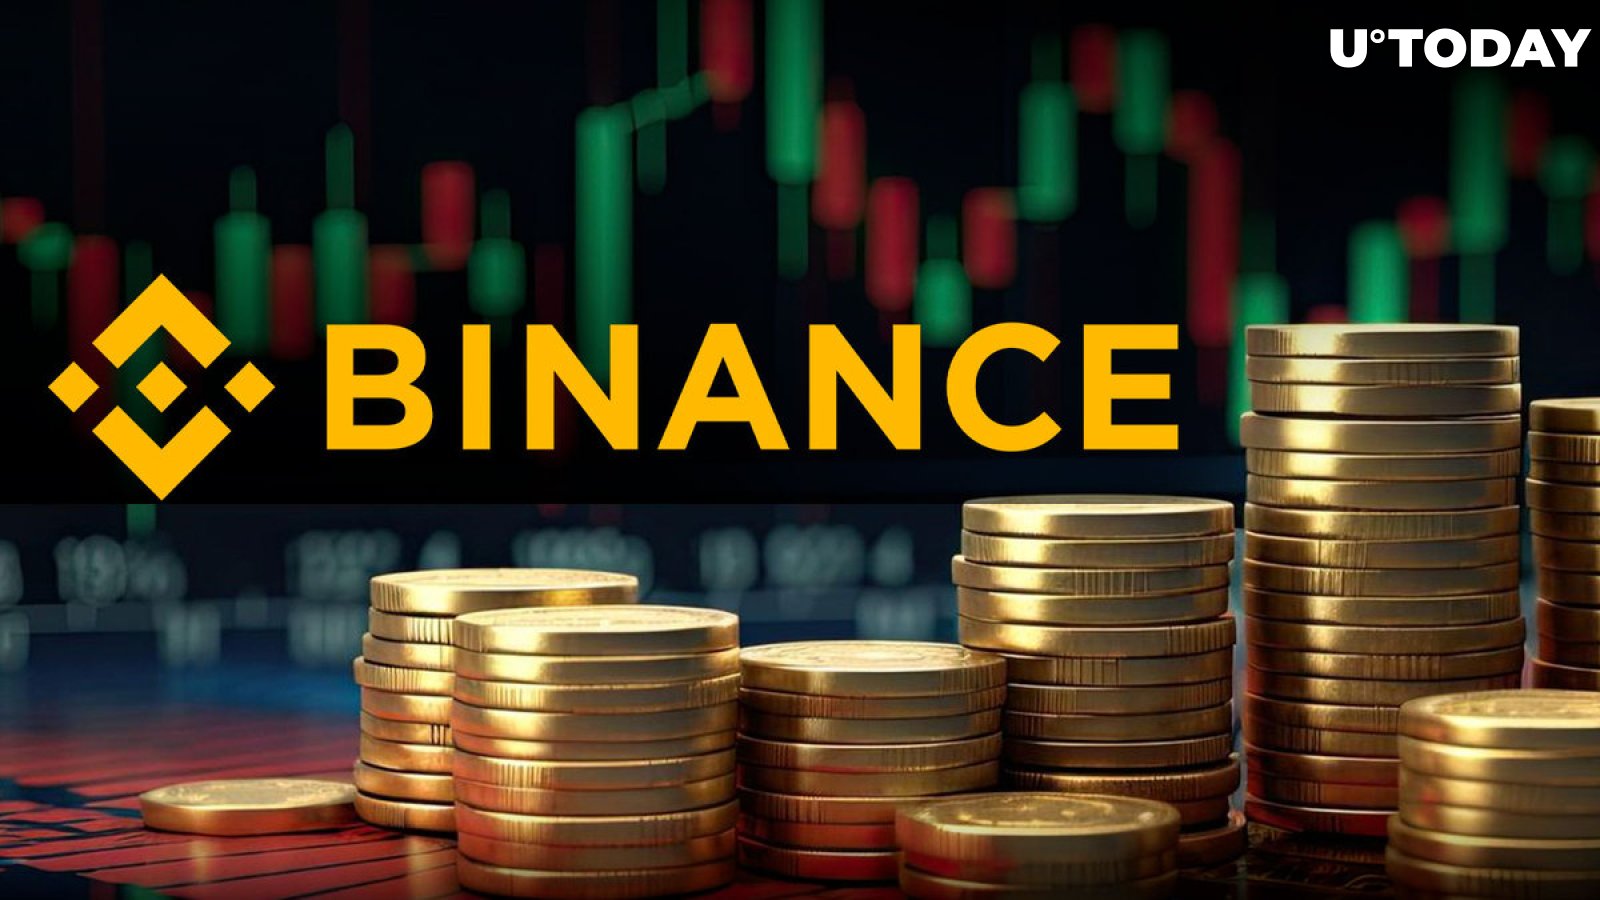 Binance to Delist Six Trading Pairs: Details